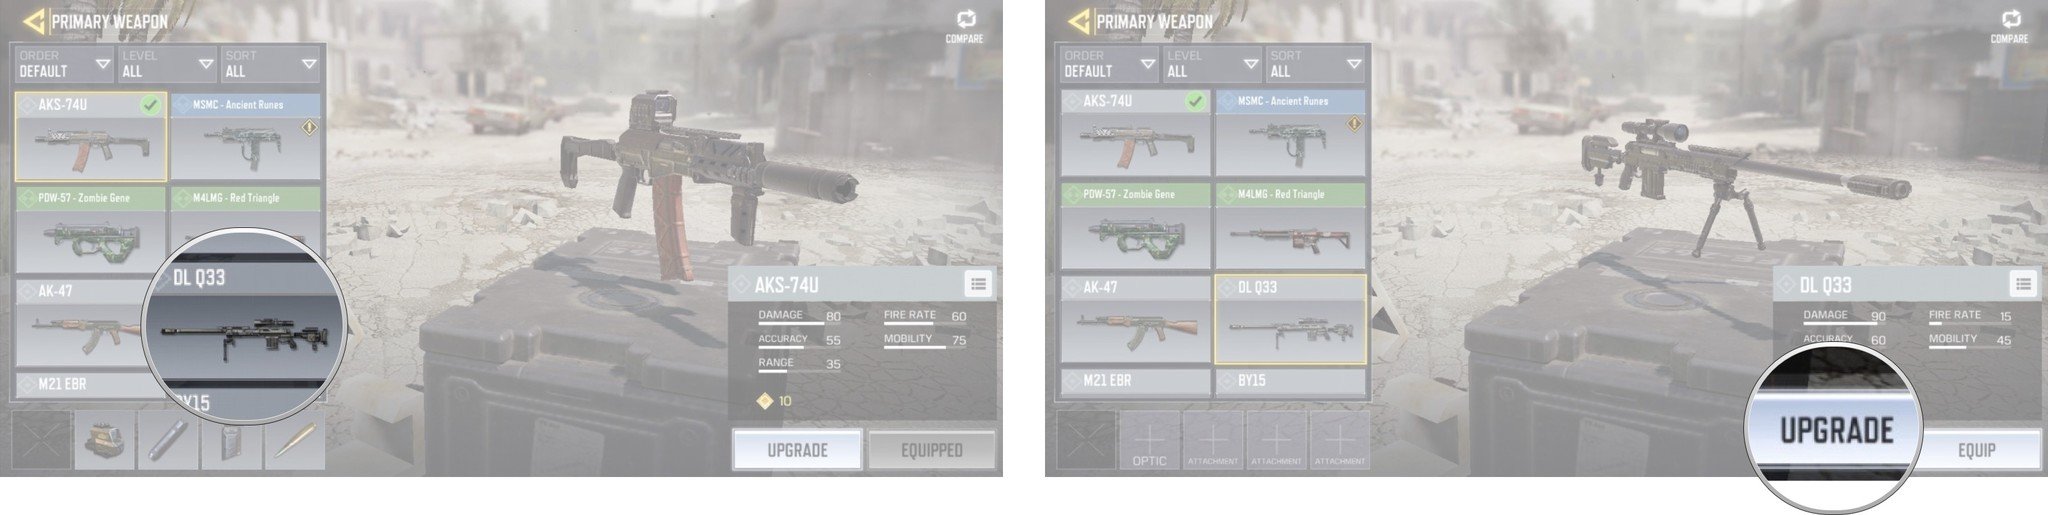 call of duty mobile weapons upgrade